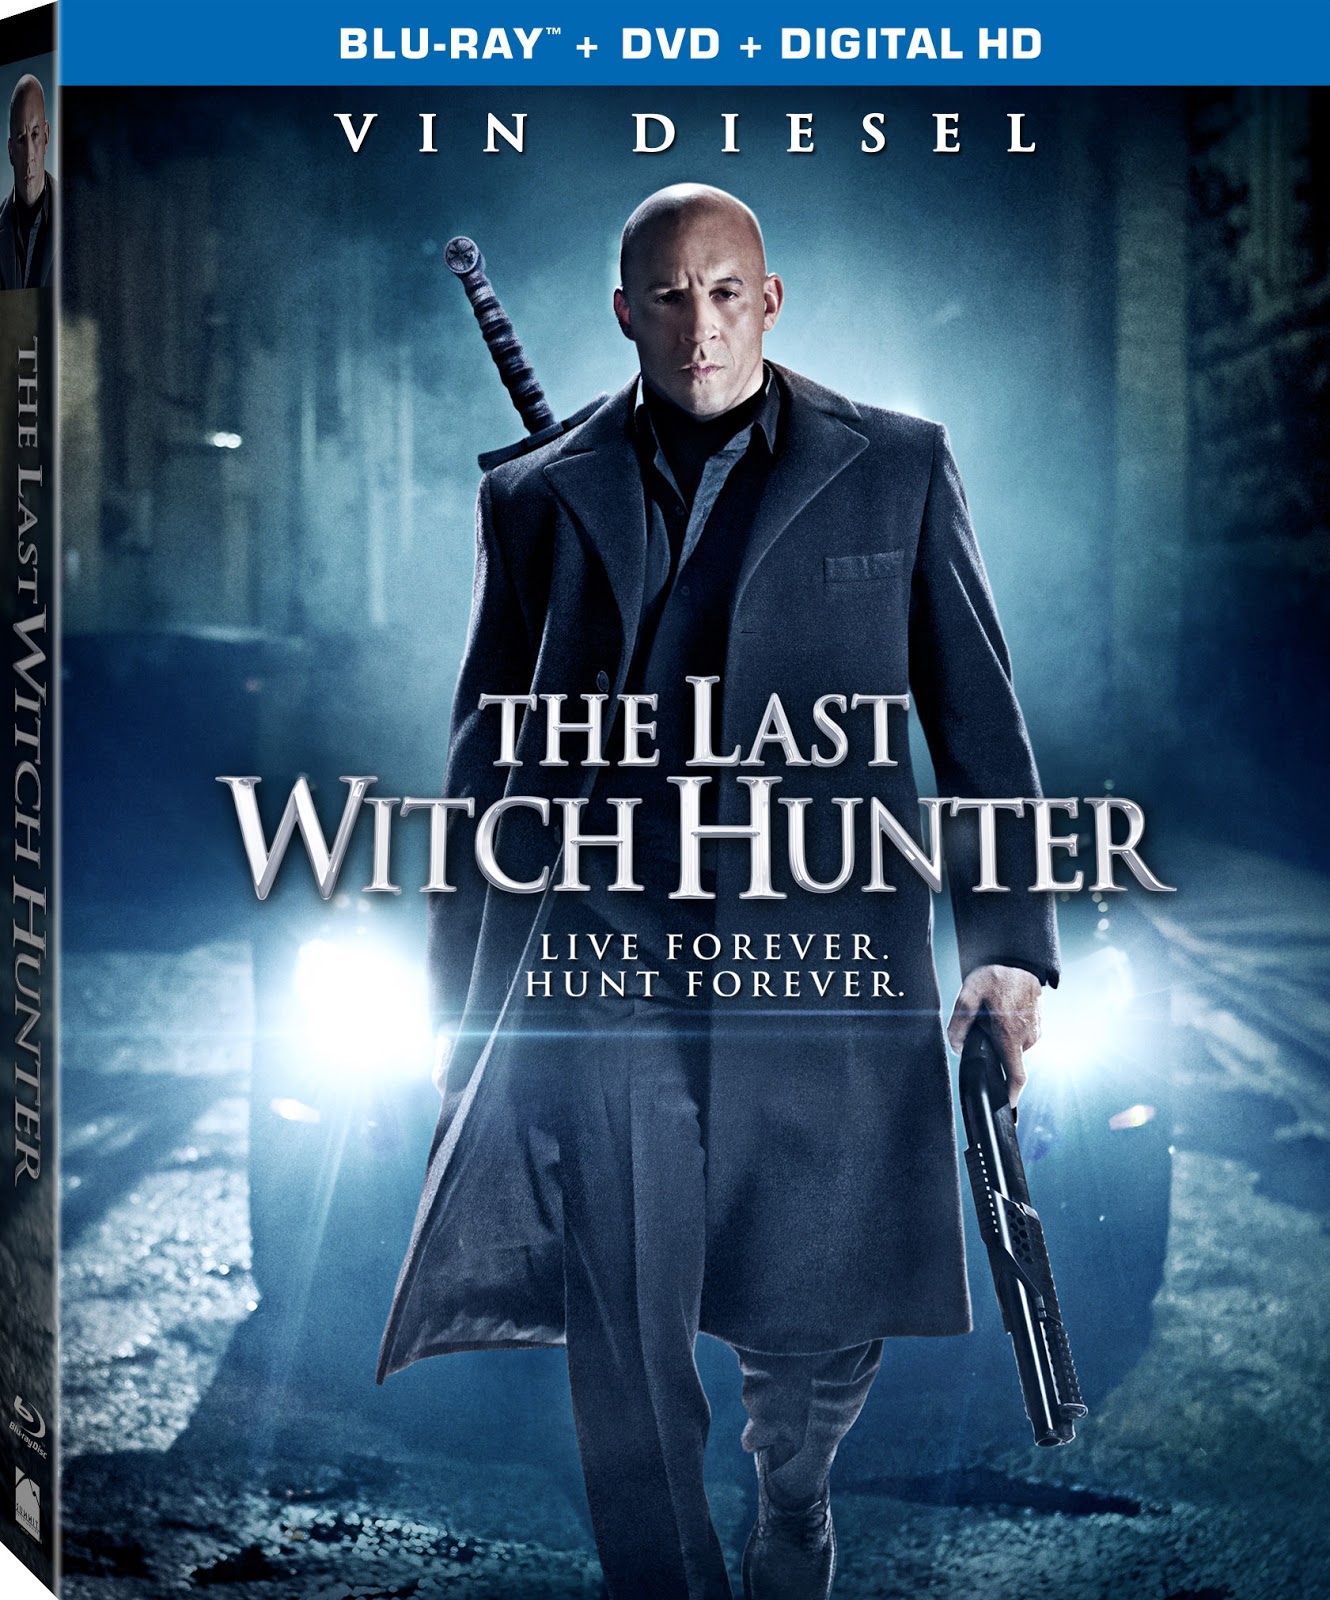 the last witch hunter 2 full movie download in hindi filmywap